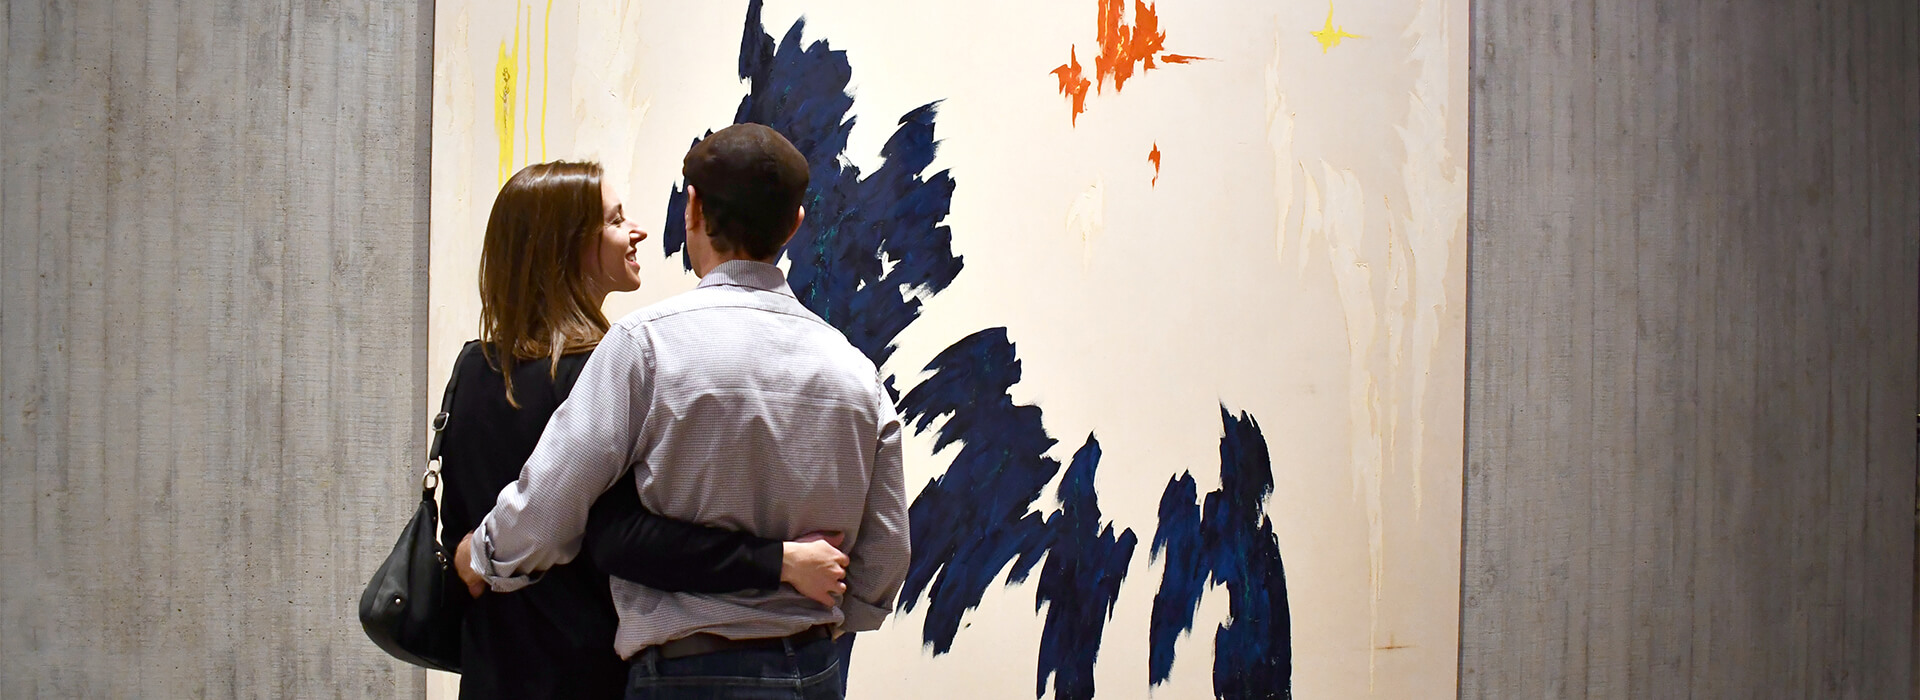 Woman smiles and looks at man as they put their arms around each other in front of a painting